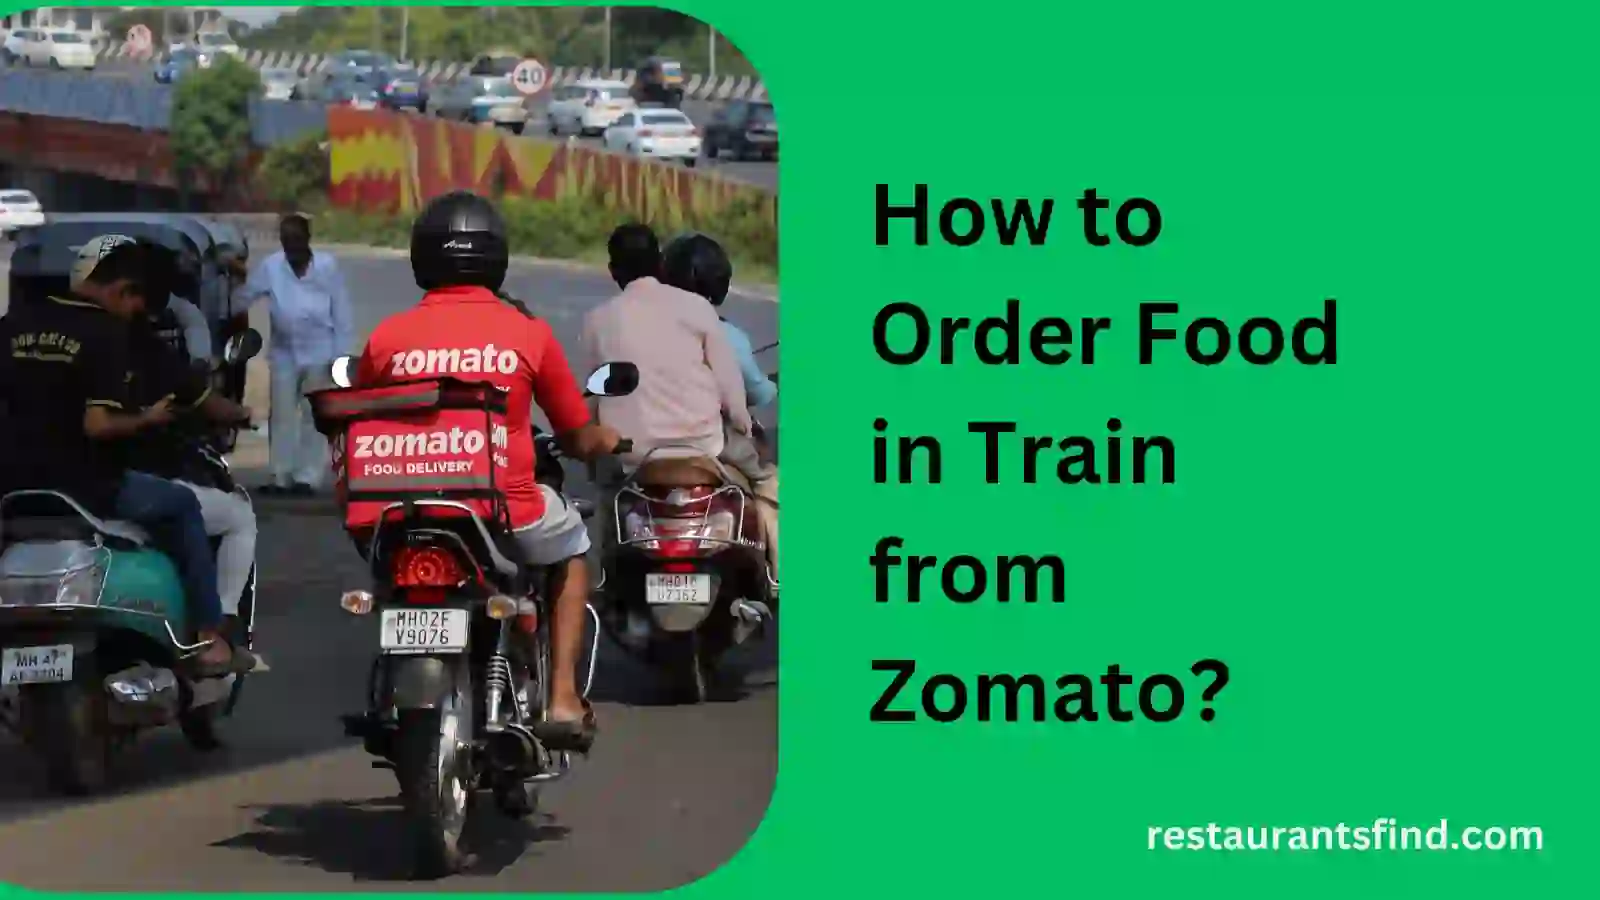 How to Order Food in Train from Zomato